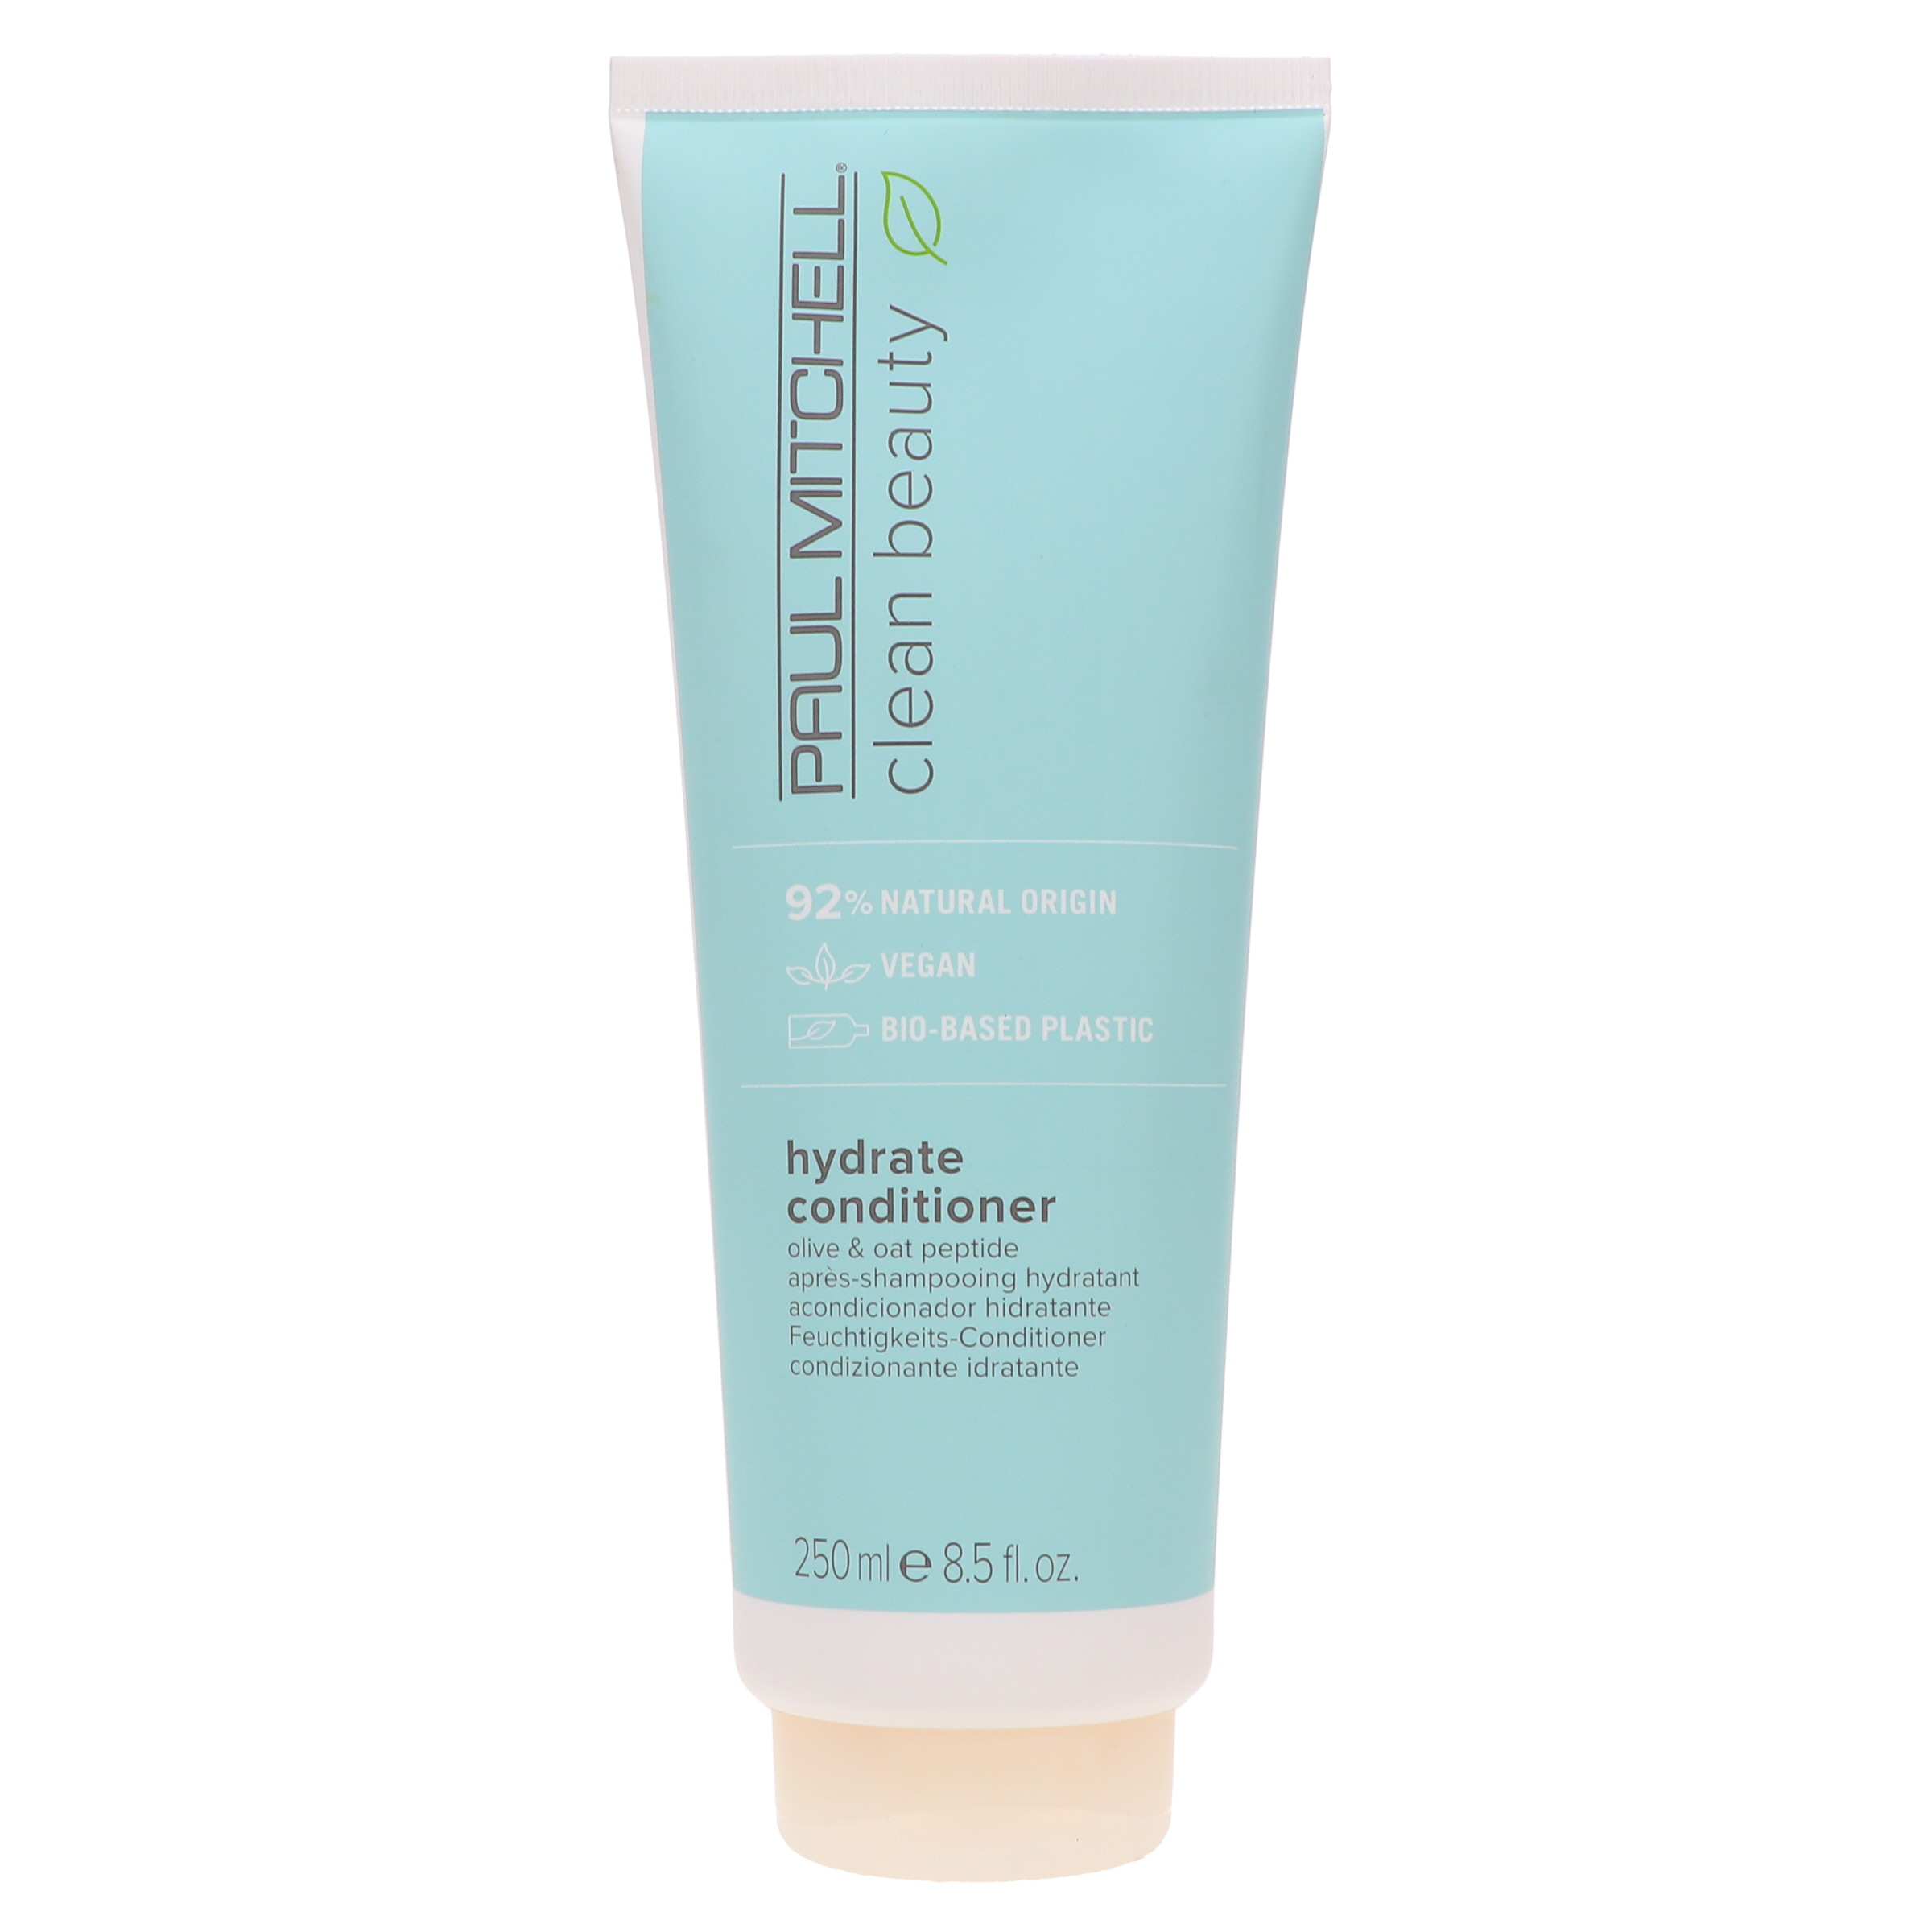 Paul Mitchell Clean Beauty Hydrate Conditioner 8.5 oz - image 1 of 8